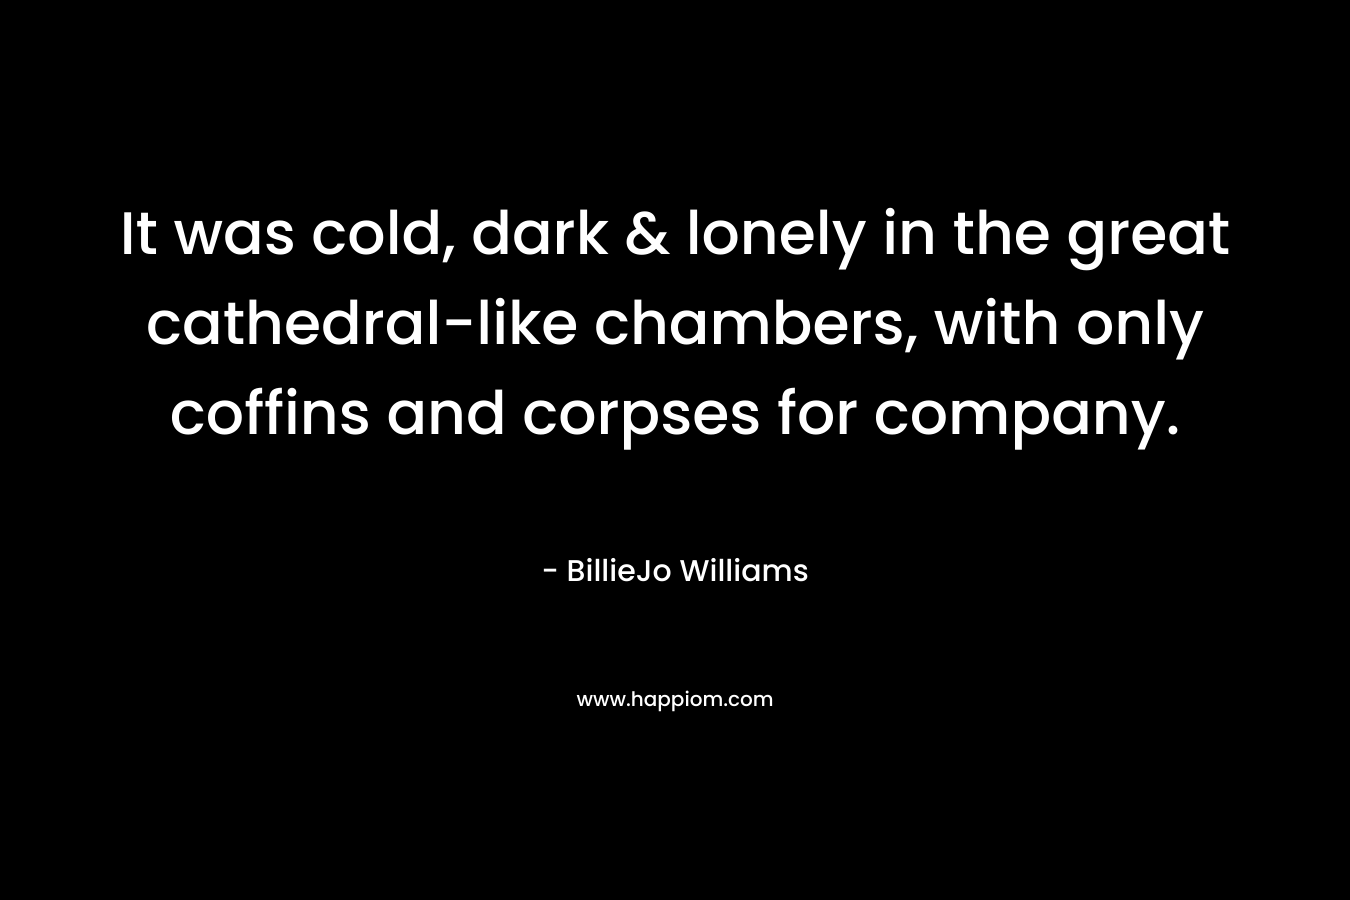 It was cold, dark & lonely in the great cathedral-like chambers, with only coffins and corpses for company. – BillieJo Williams